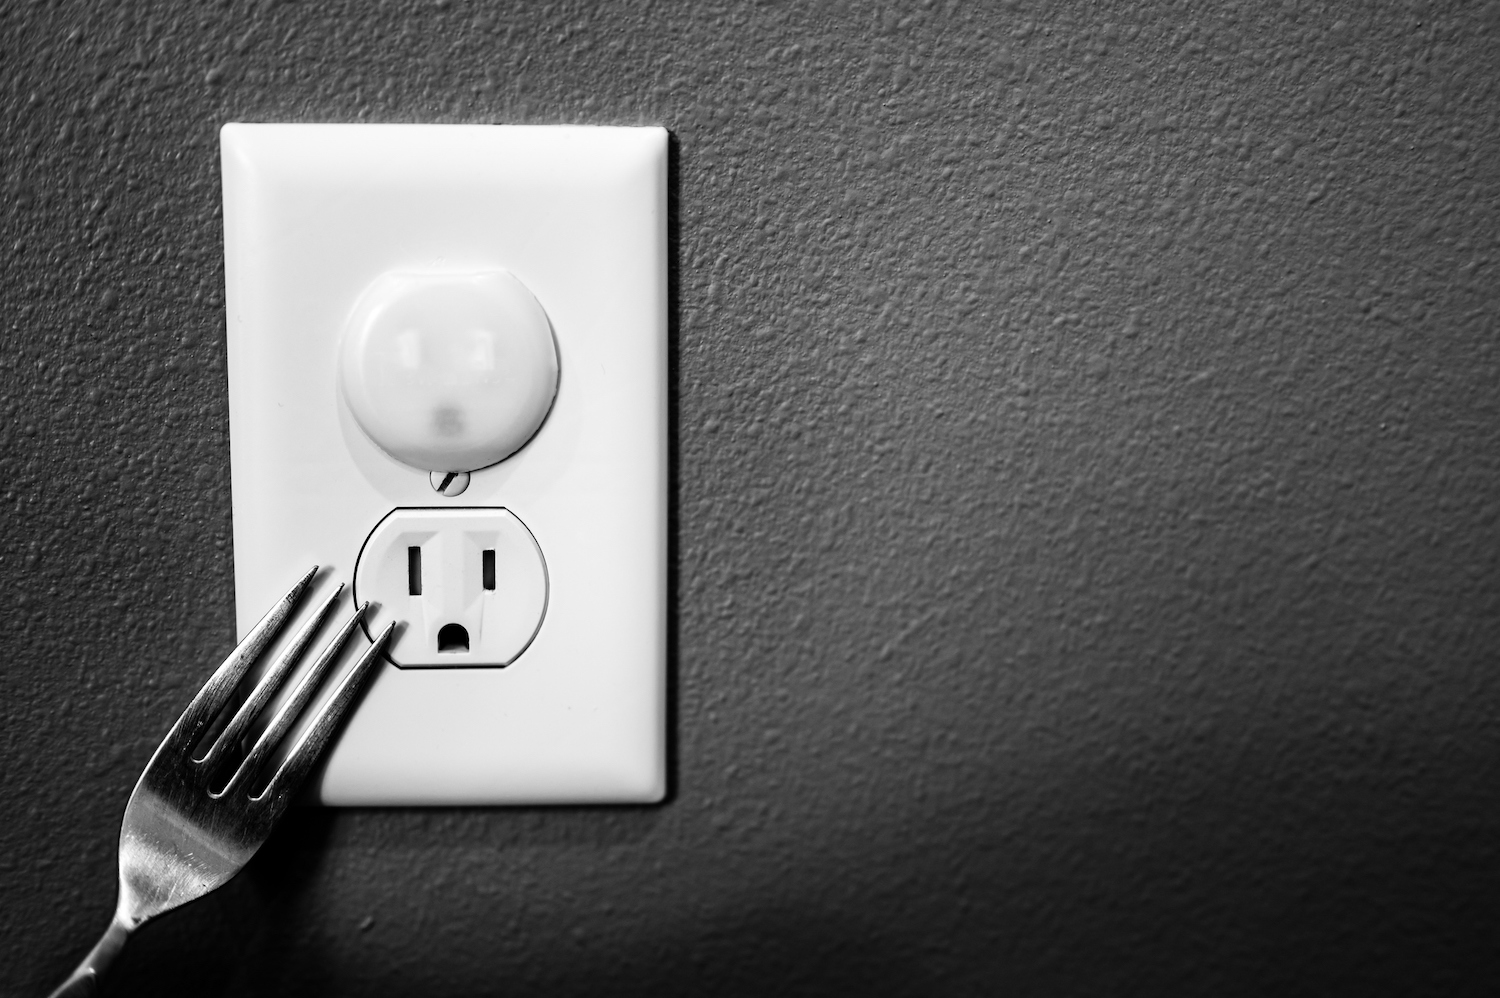 Concept of dangers and hazards associated with uncovered electrical outlets A sharp metal object that can penetrate and cause shock.